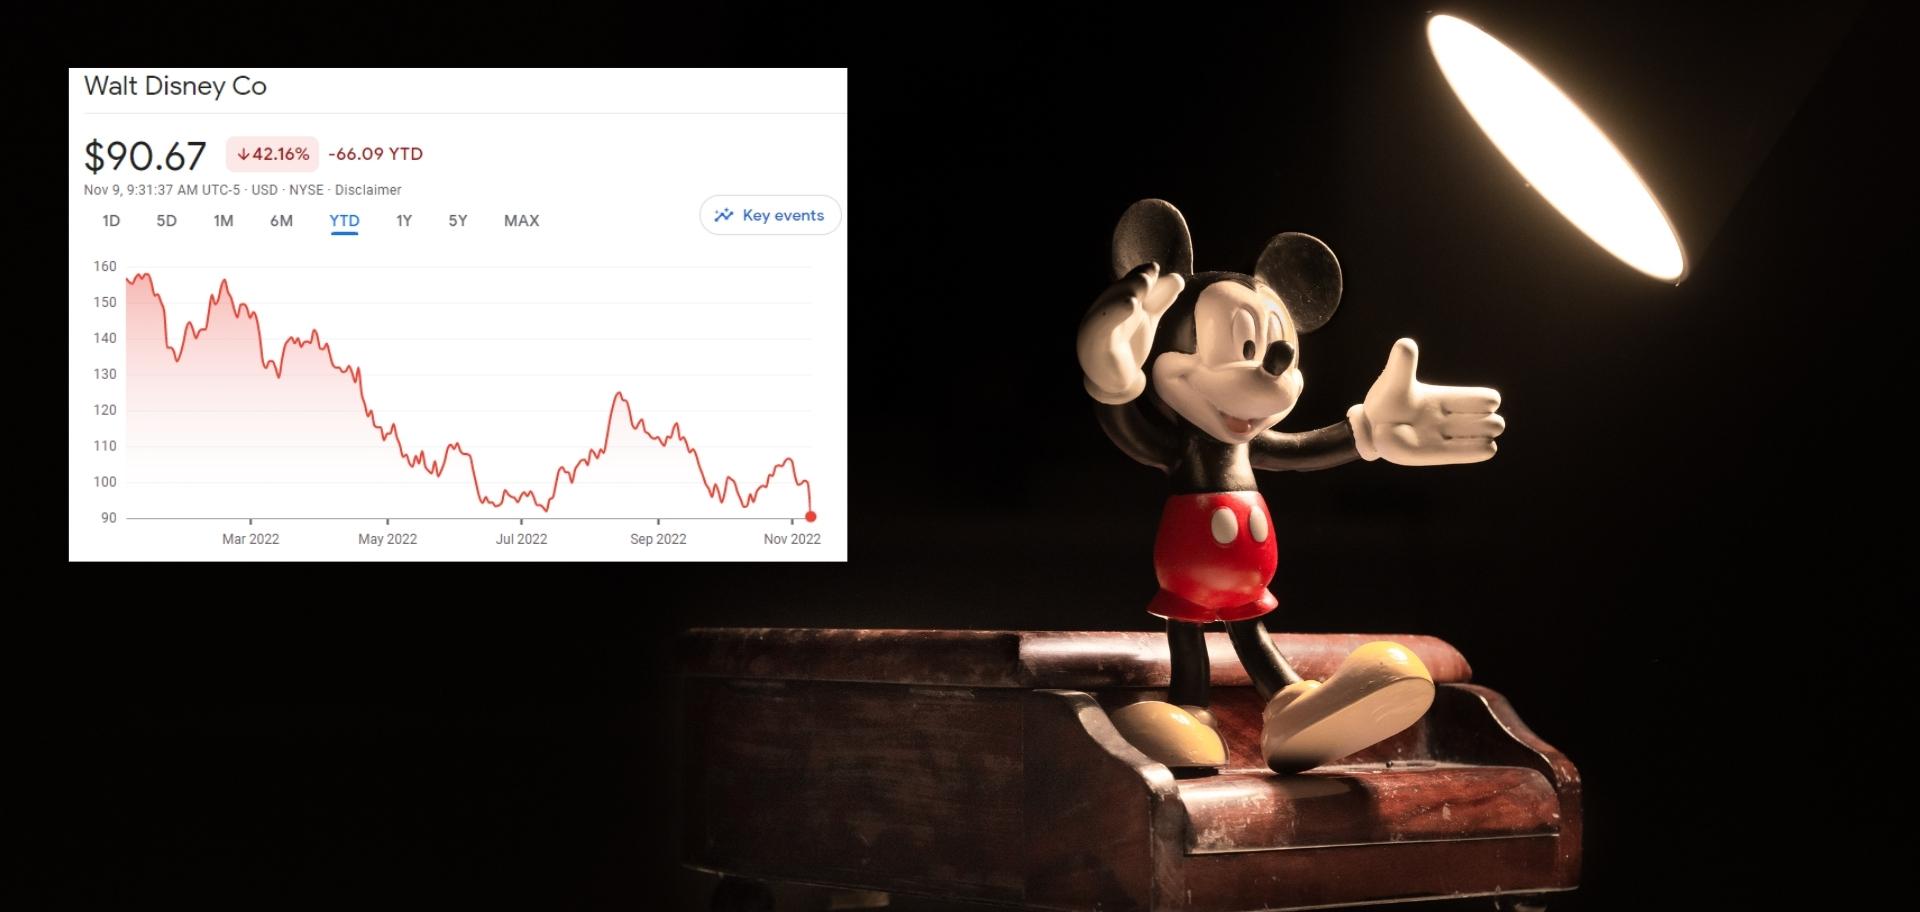 Disney is taking the mickey